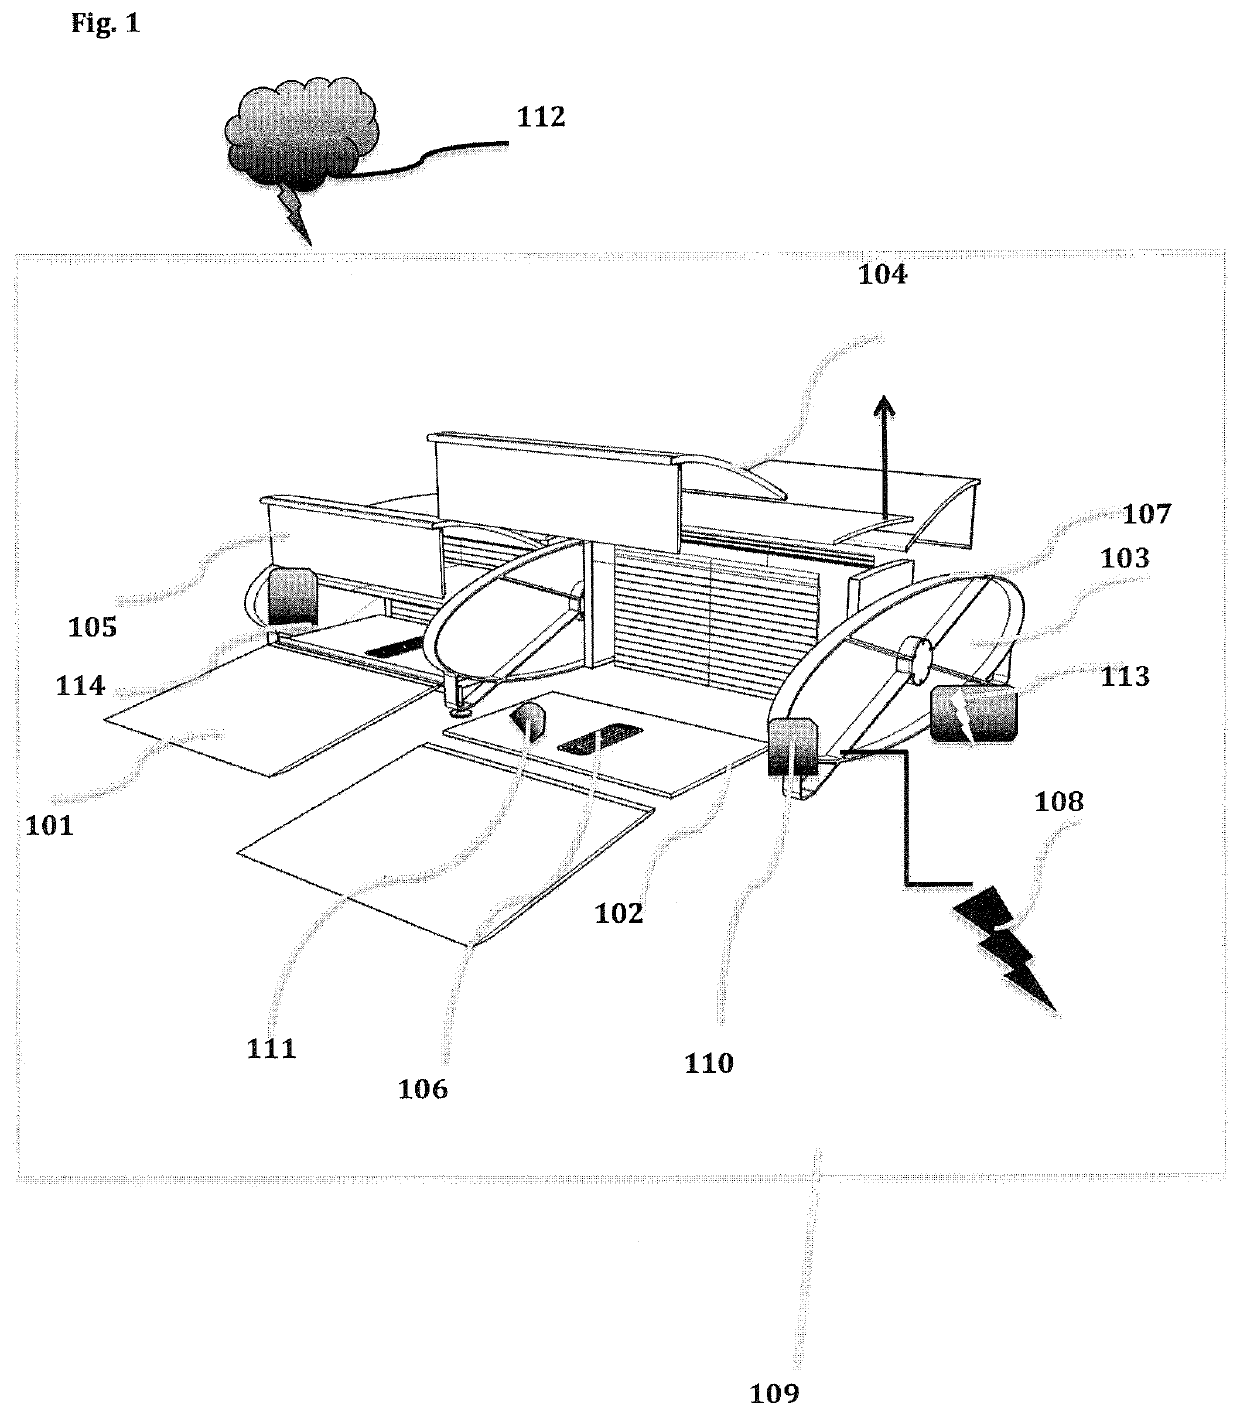 Docking and recharging station for unmanned aerial vehicles capable of ground movement